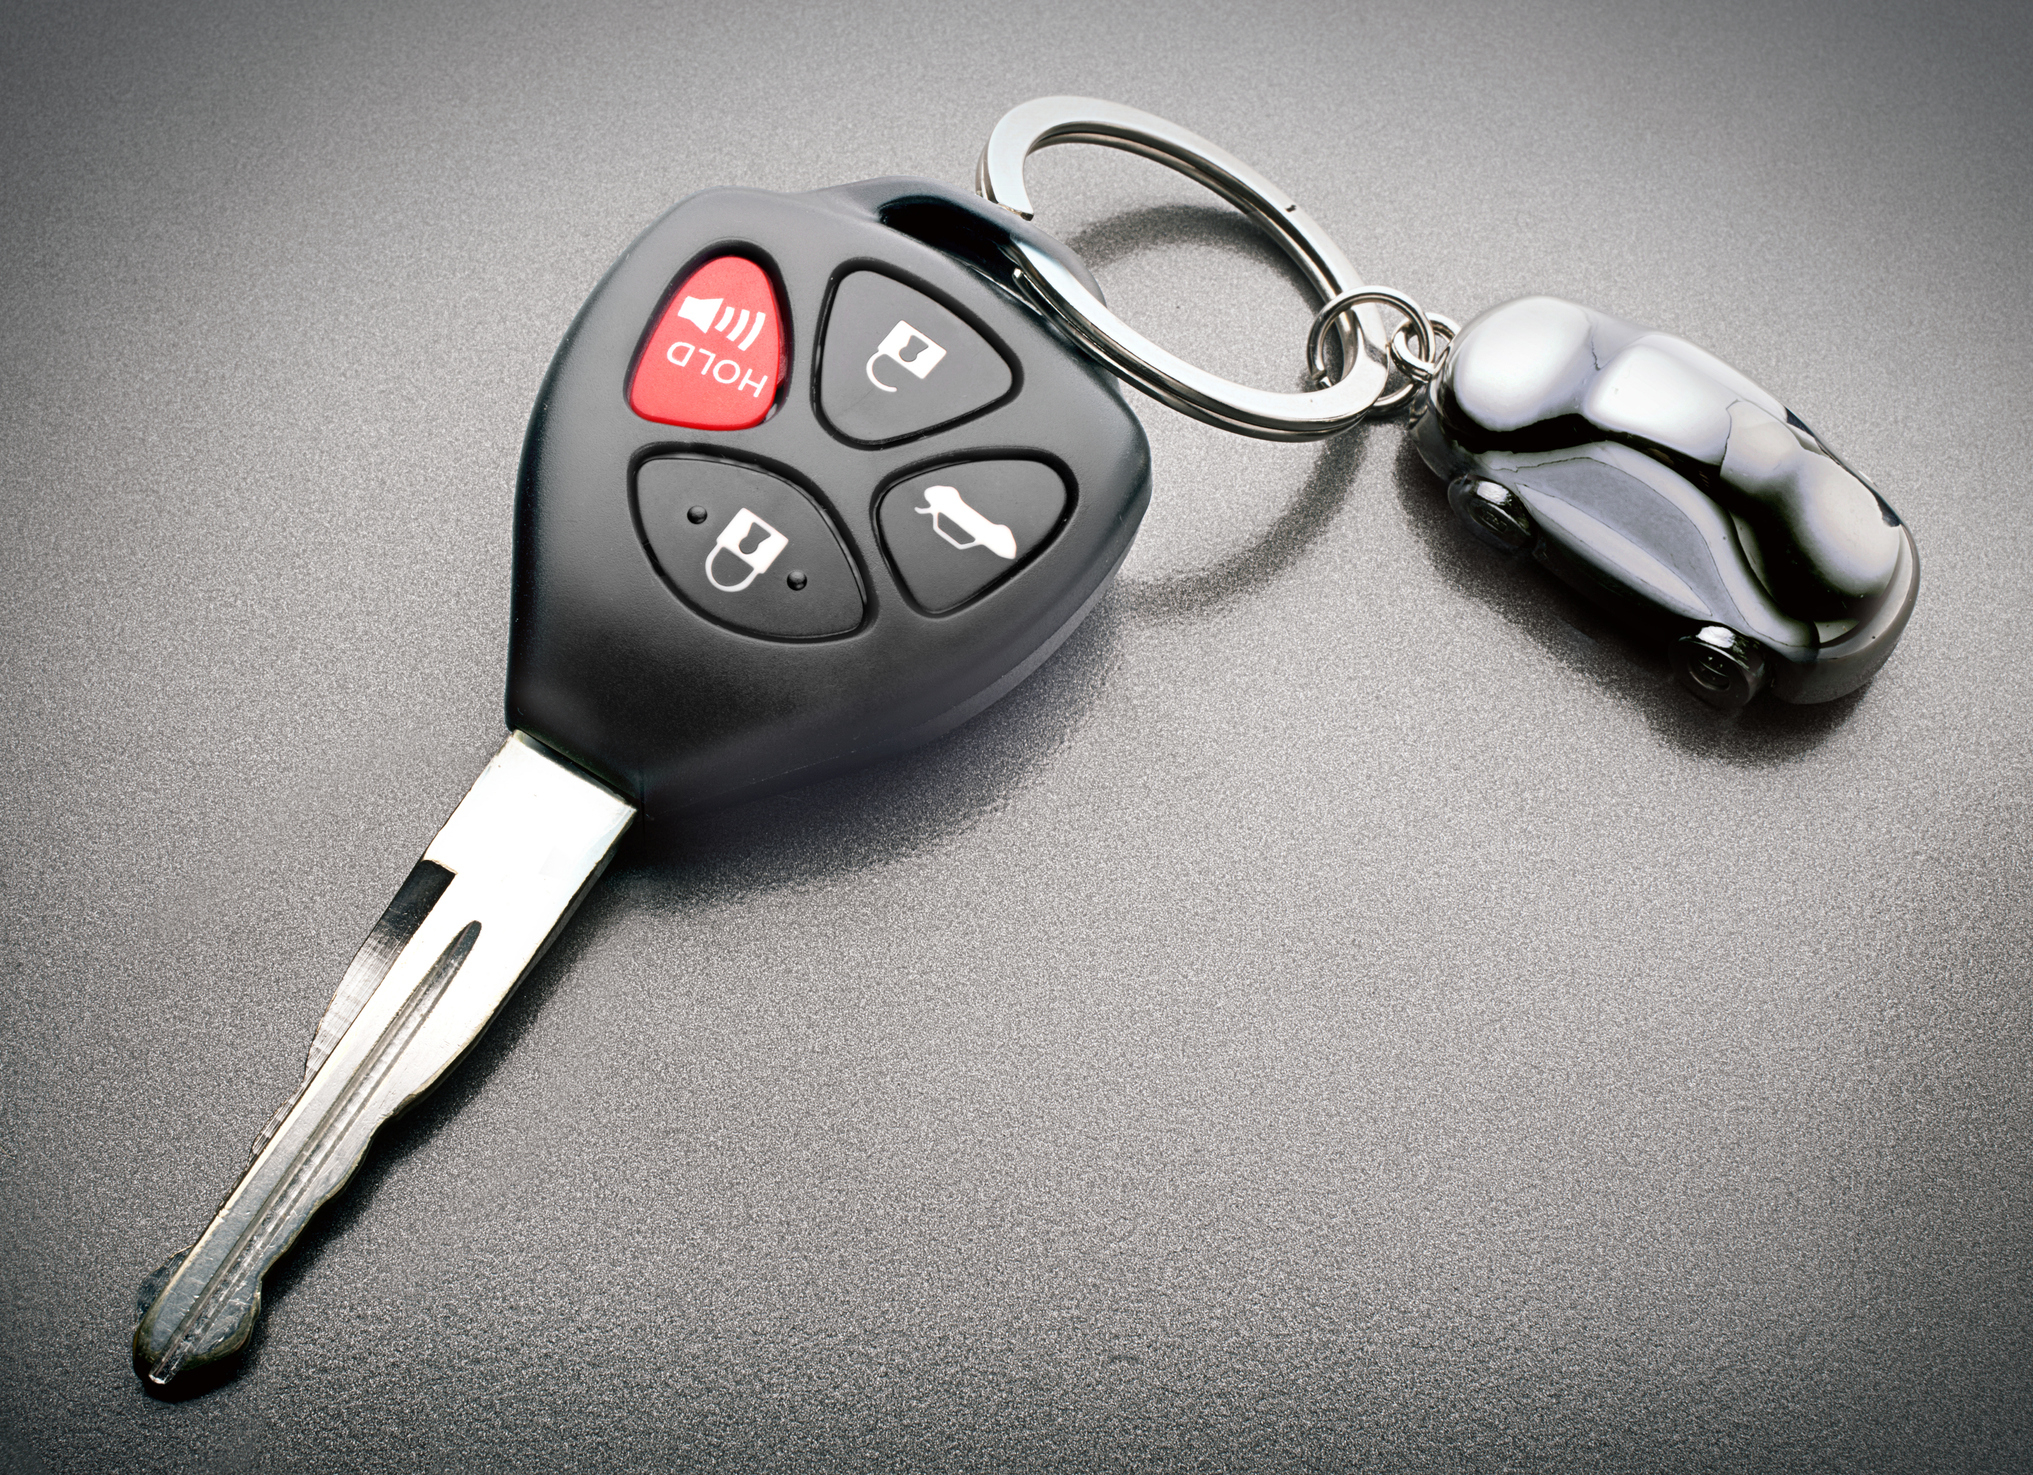 Car key with integrated remote buttons and a keychain shaped like a car